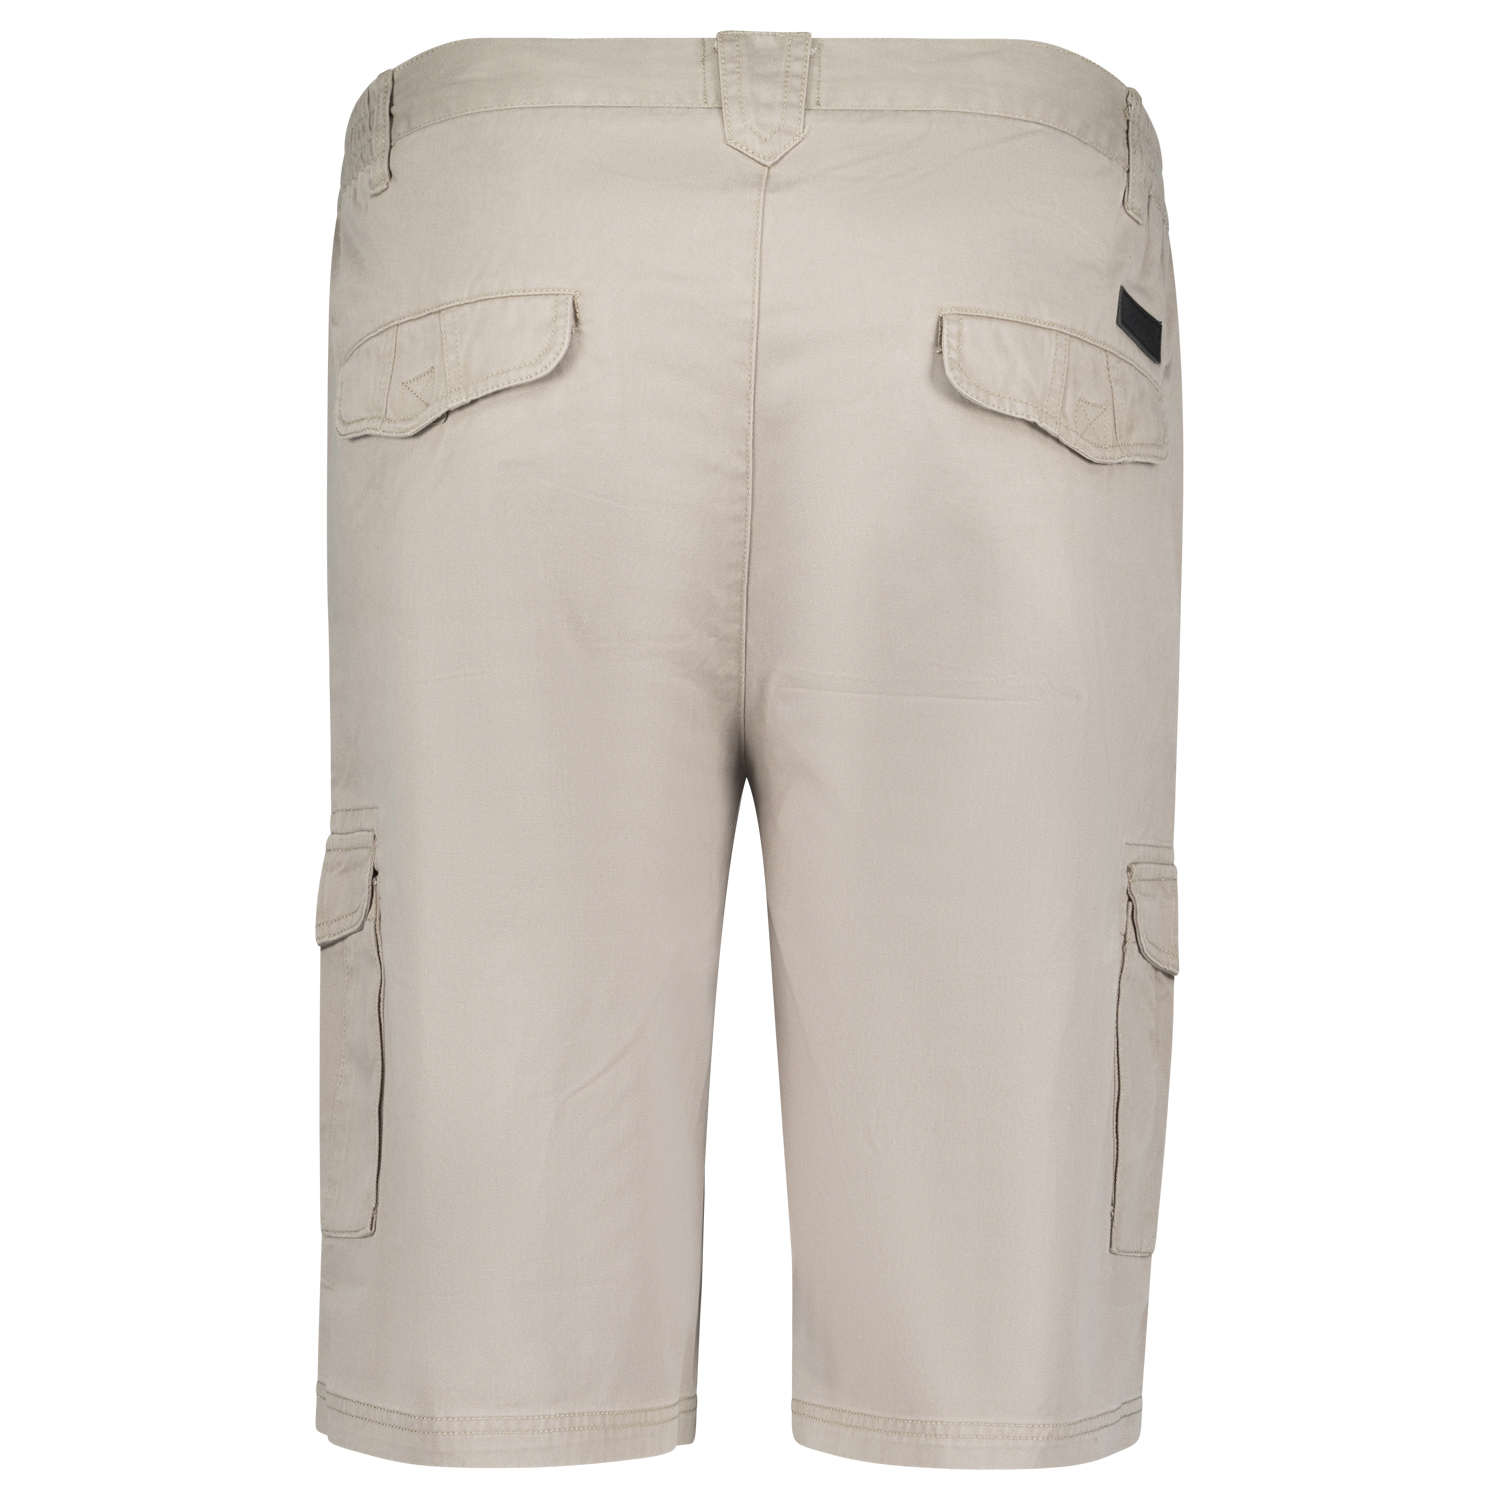 Cargo shorts by North 56°4 up to oversize 8XL / sand-colored